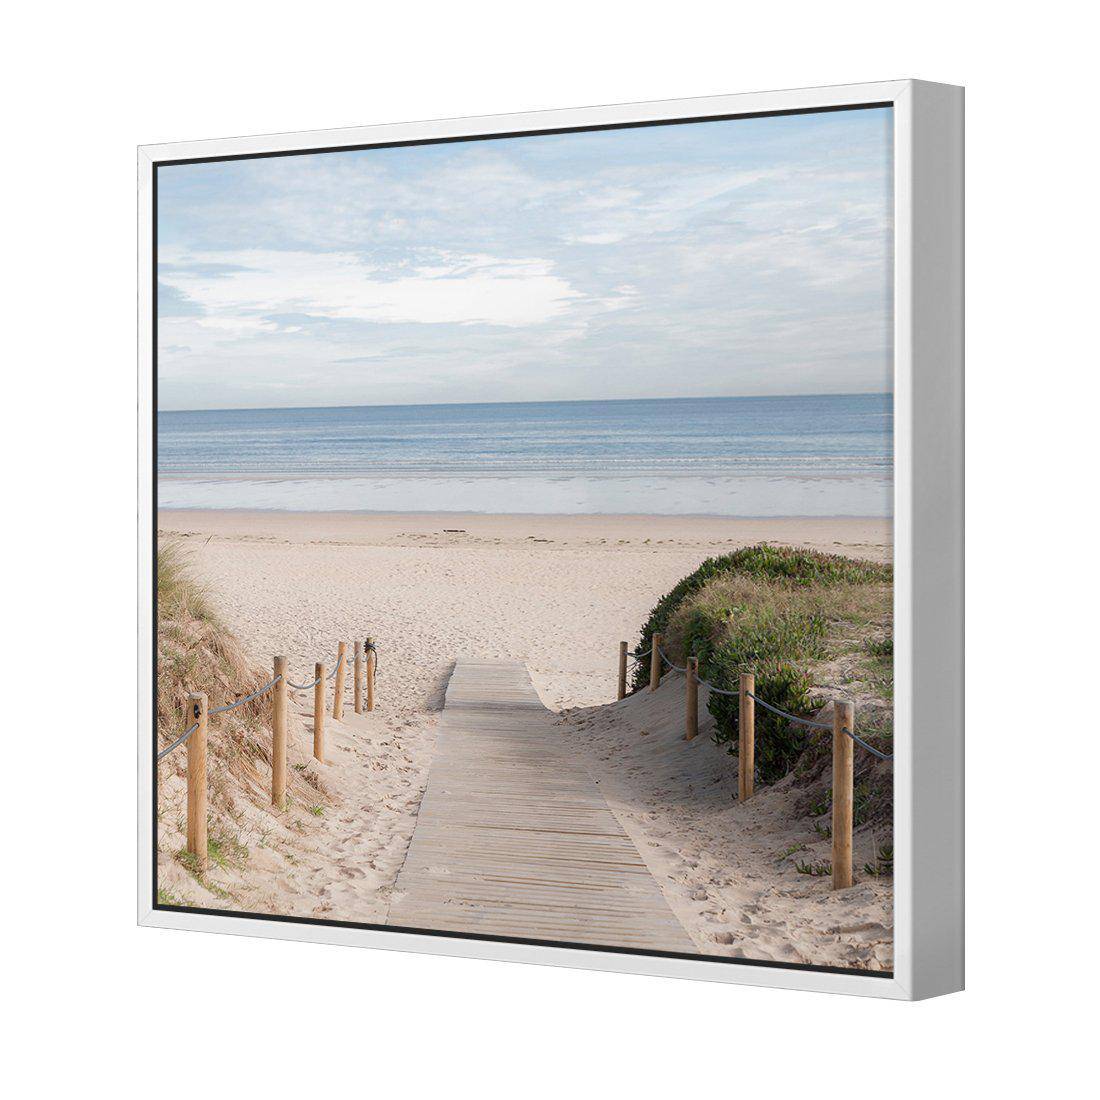 Pathway To The Sea Canvas Art-Canvas-Wall Art Designs-30x30cm-Canvas - White Frame-Wall Art Designs